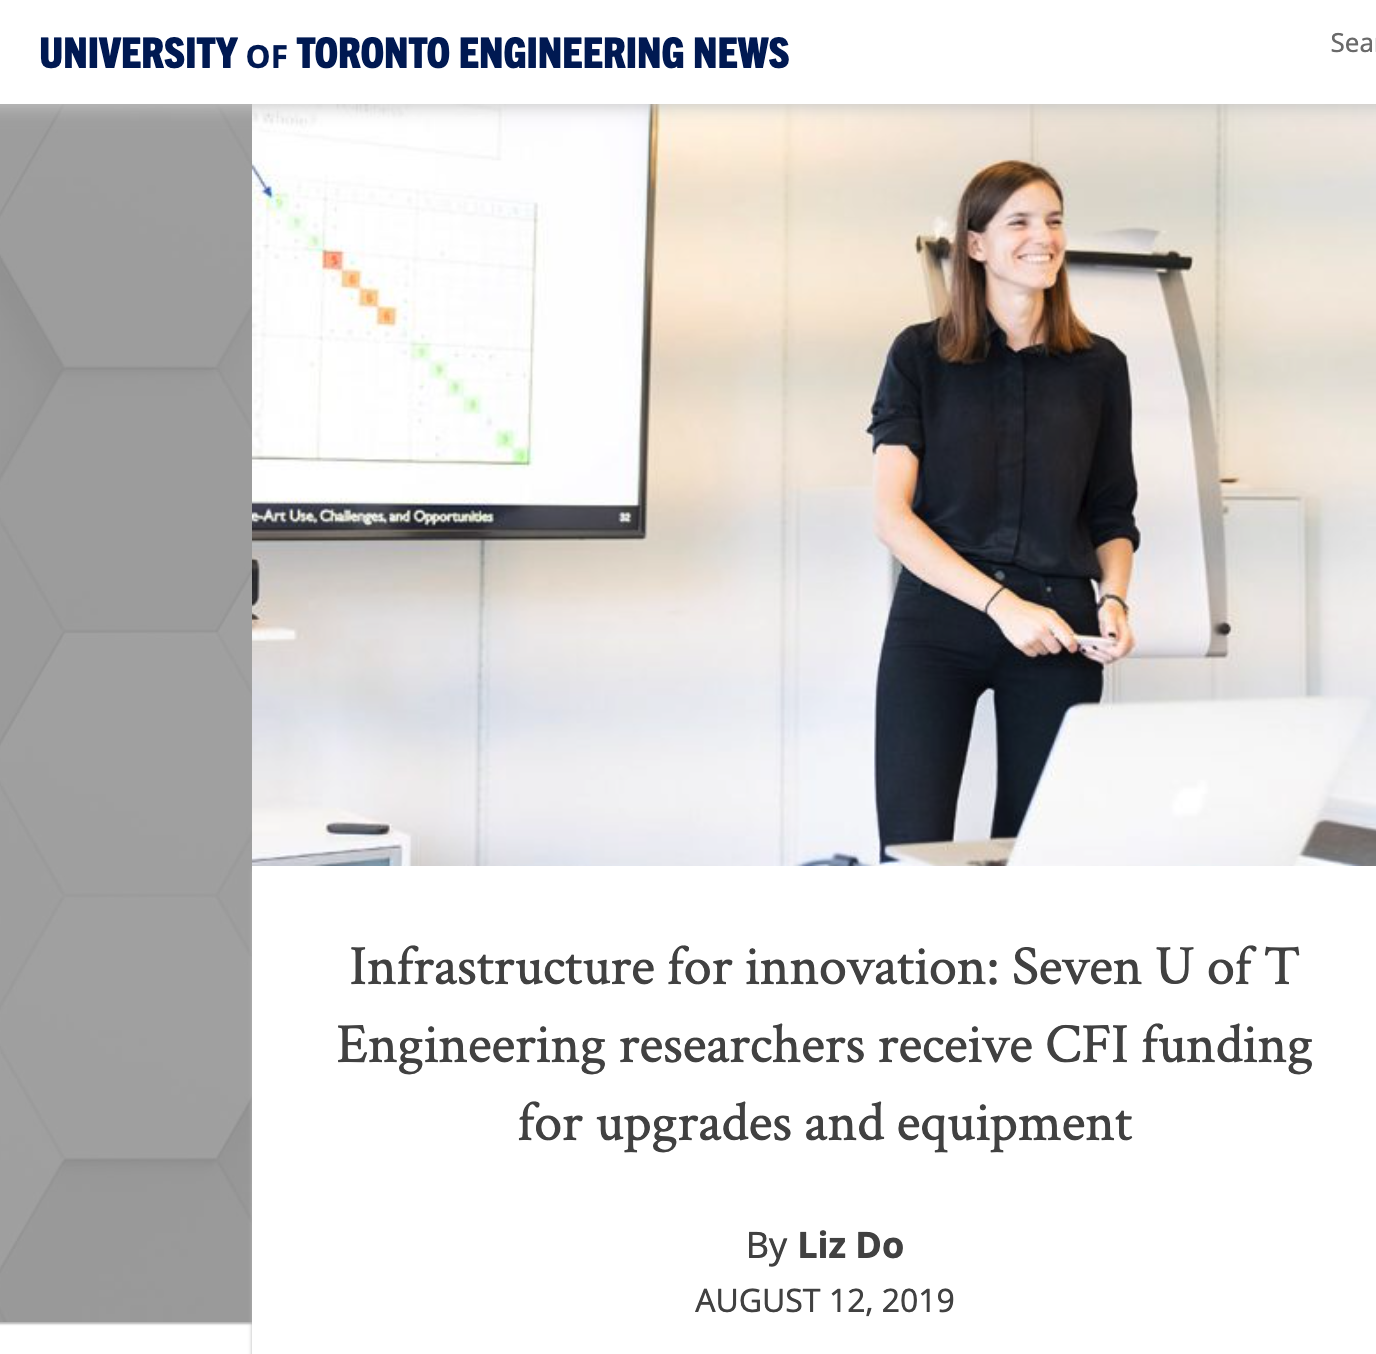 Prof. Olechowski receives CFI funding for upgrades and equipment